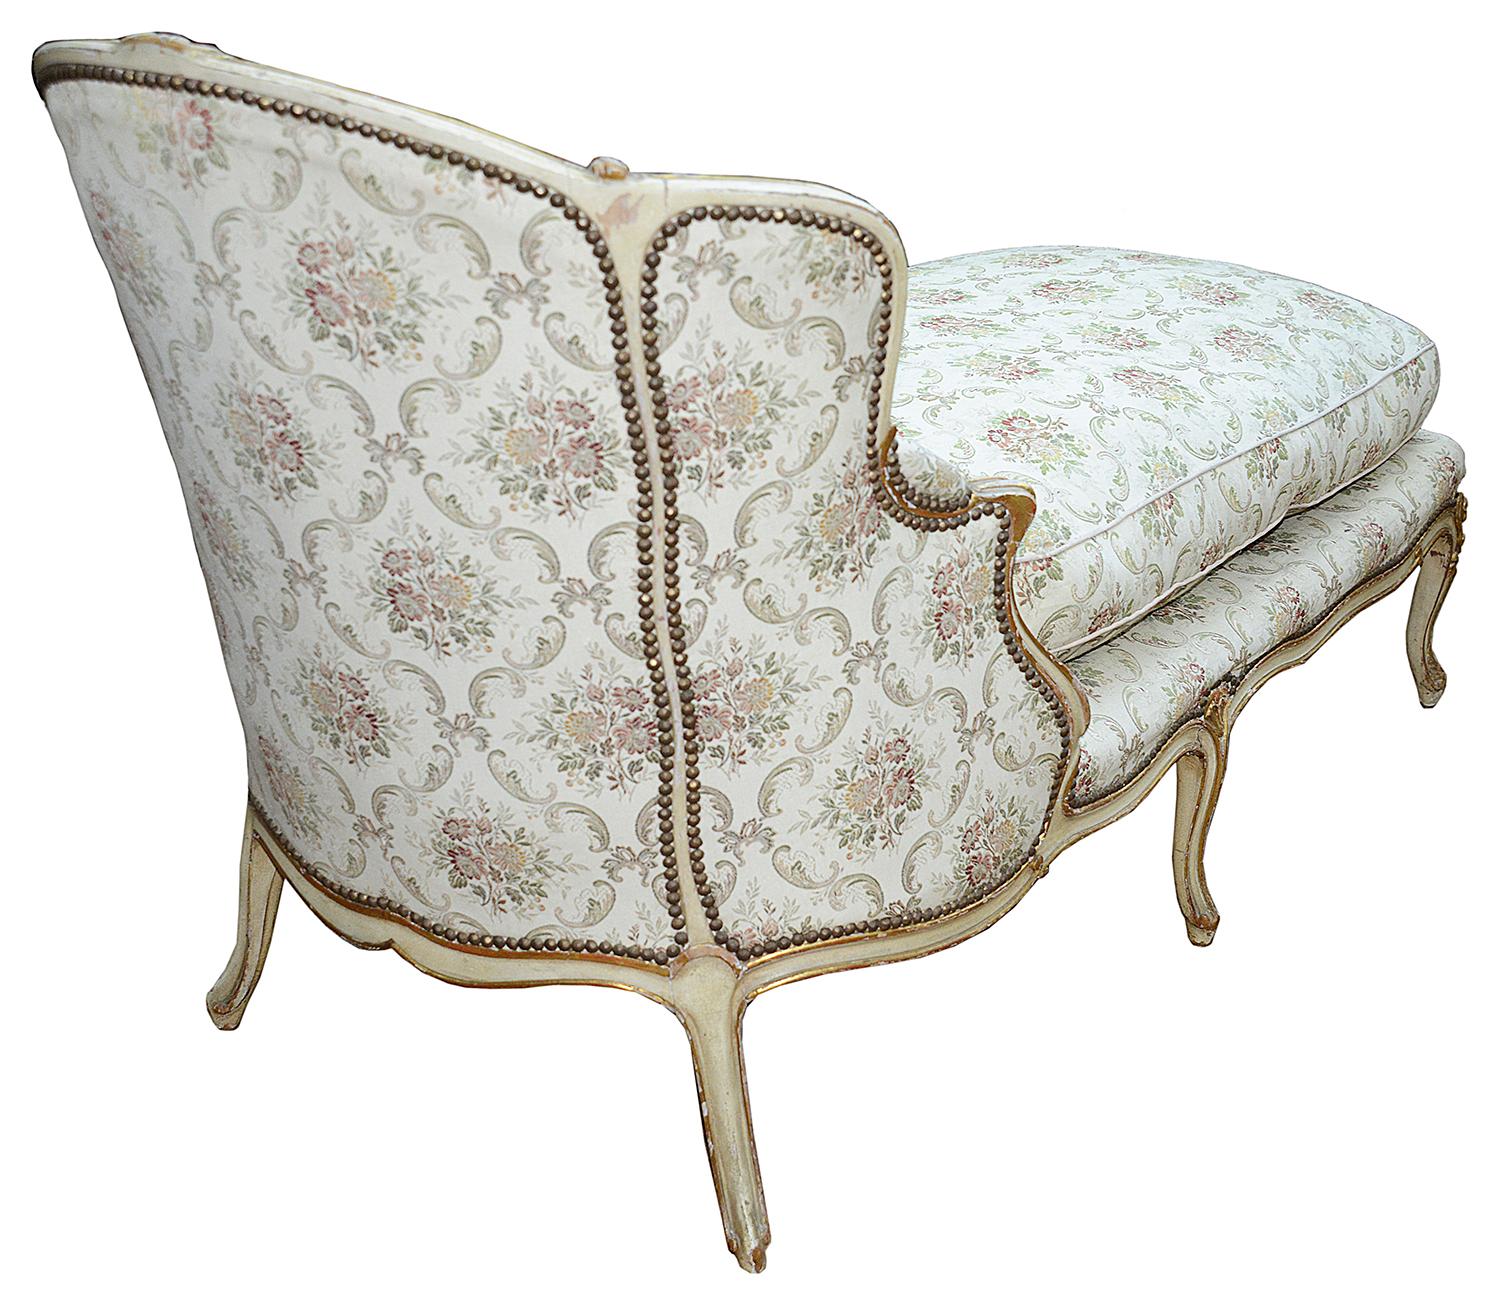 A very stylish 19th century French ivory decorated show wood daybed, raised on elegant cabriole legs.